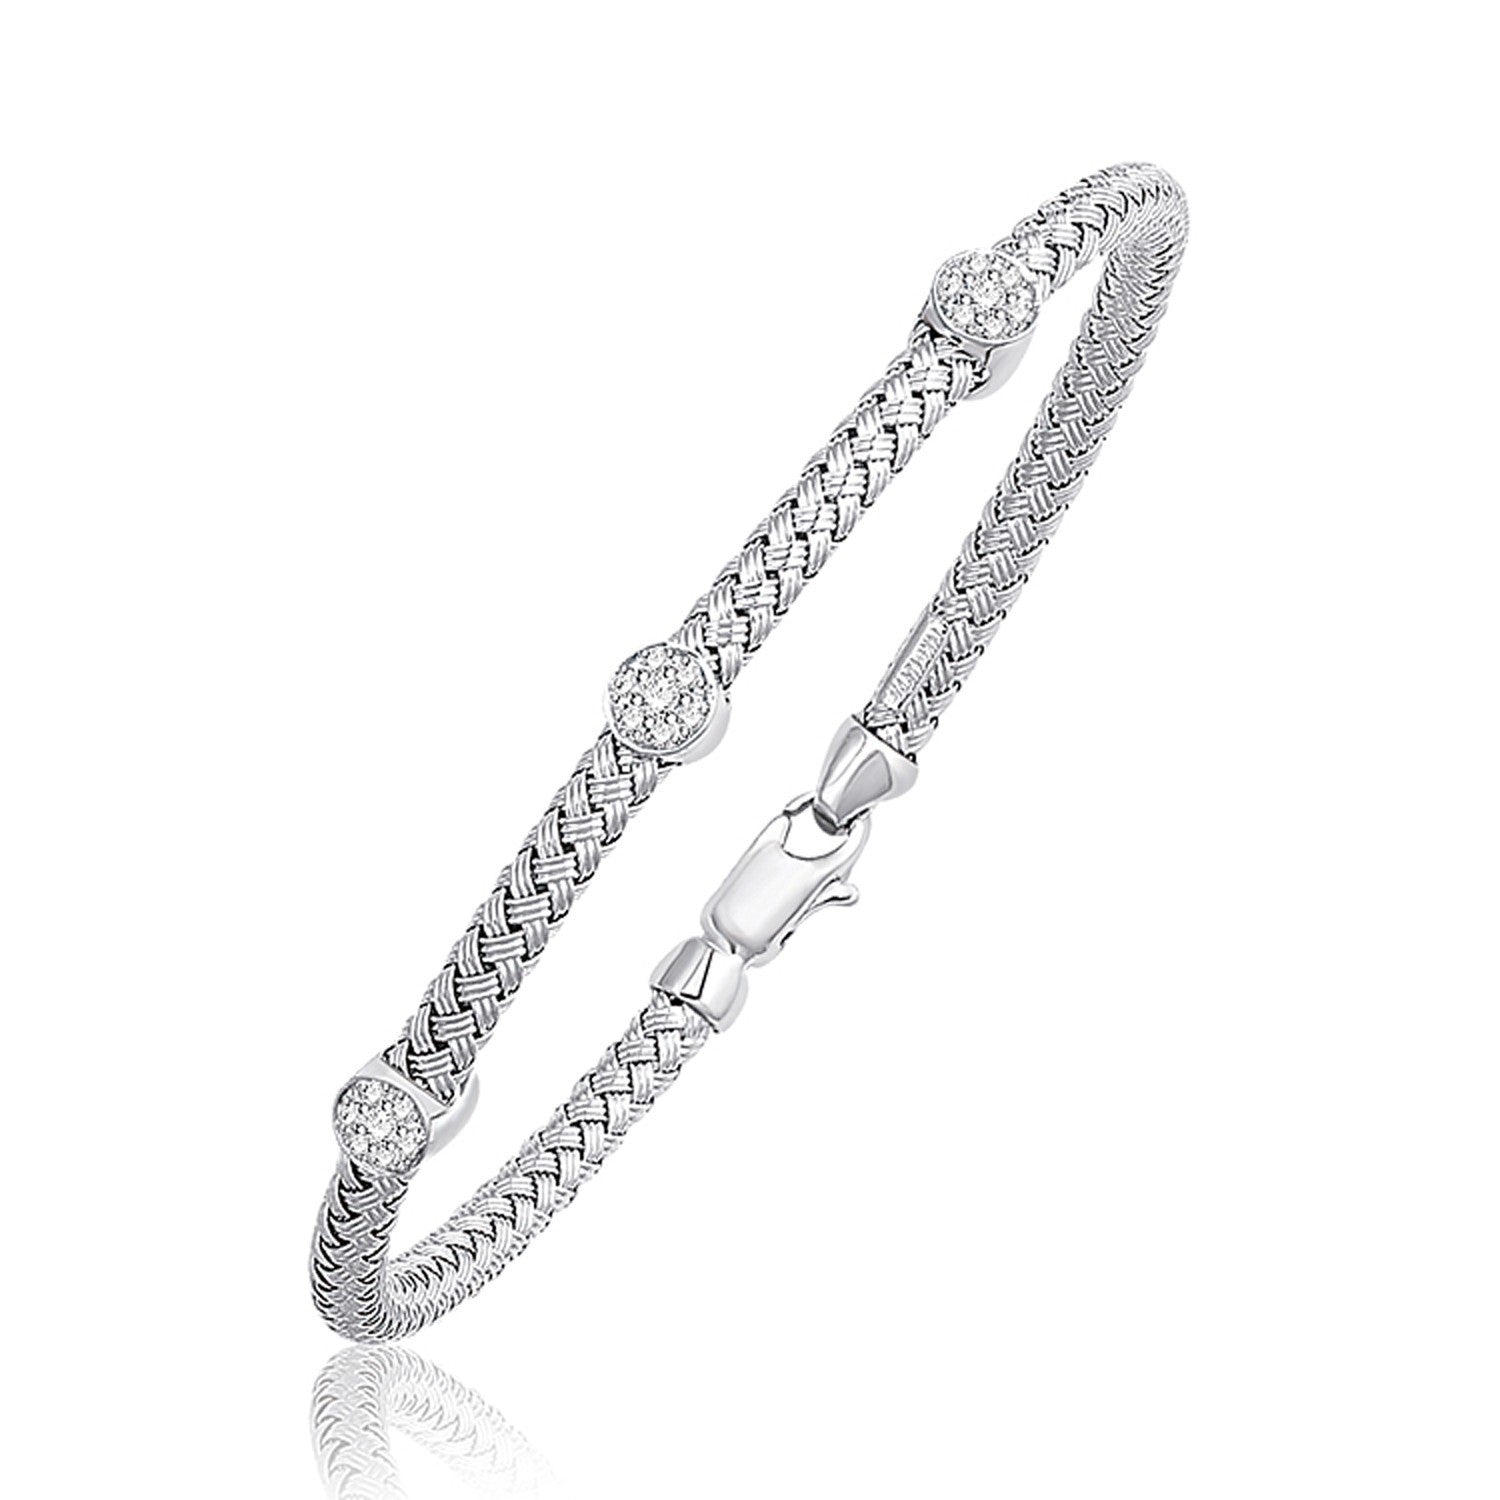 Basket Weave Bangle with Diamond Accents in 14k White Gold (4.0mm), size 7.25''